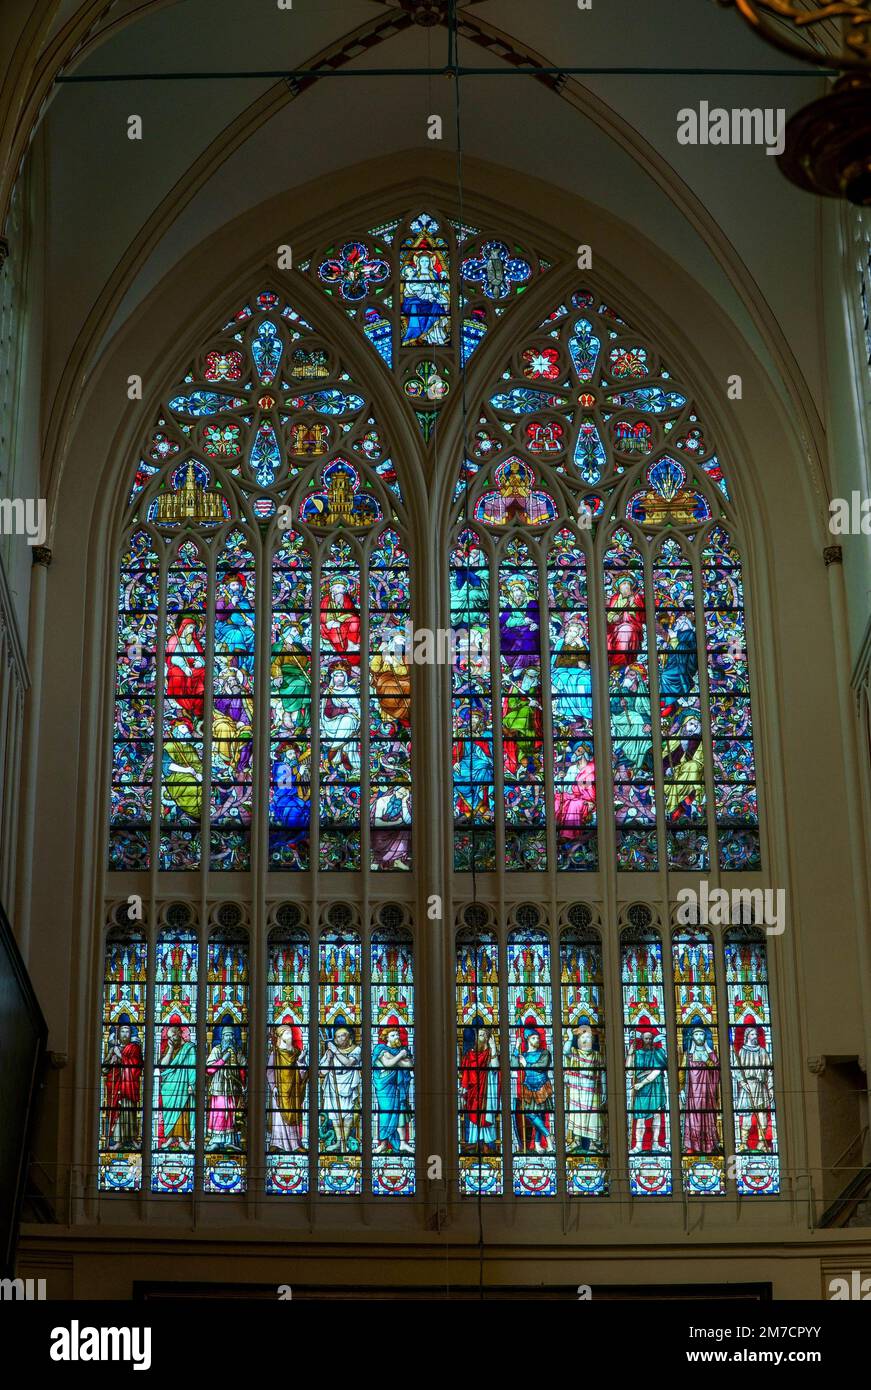 Stained glass depicting Saints and the 12 sons of Jacob in the lower section, St Salvador's Cathedral Bruges, Belgium. November 2022 Stock Photo